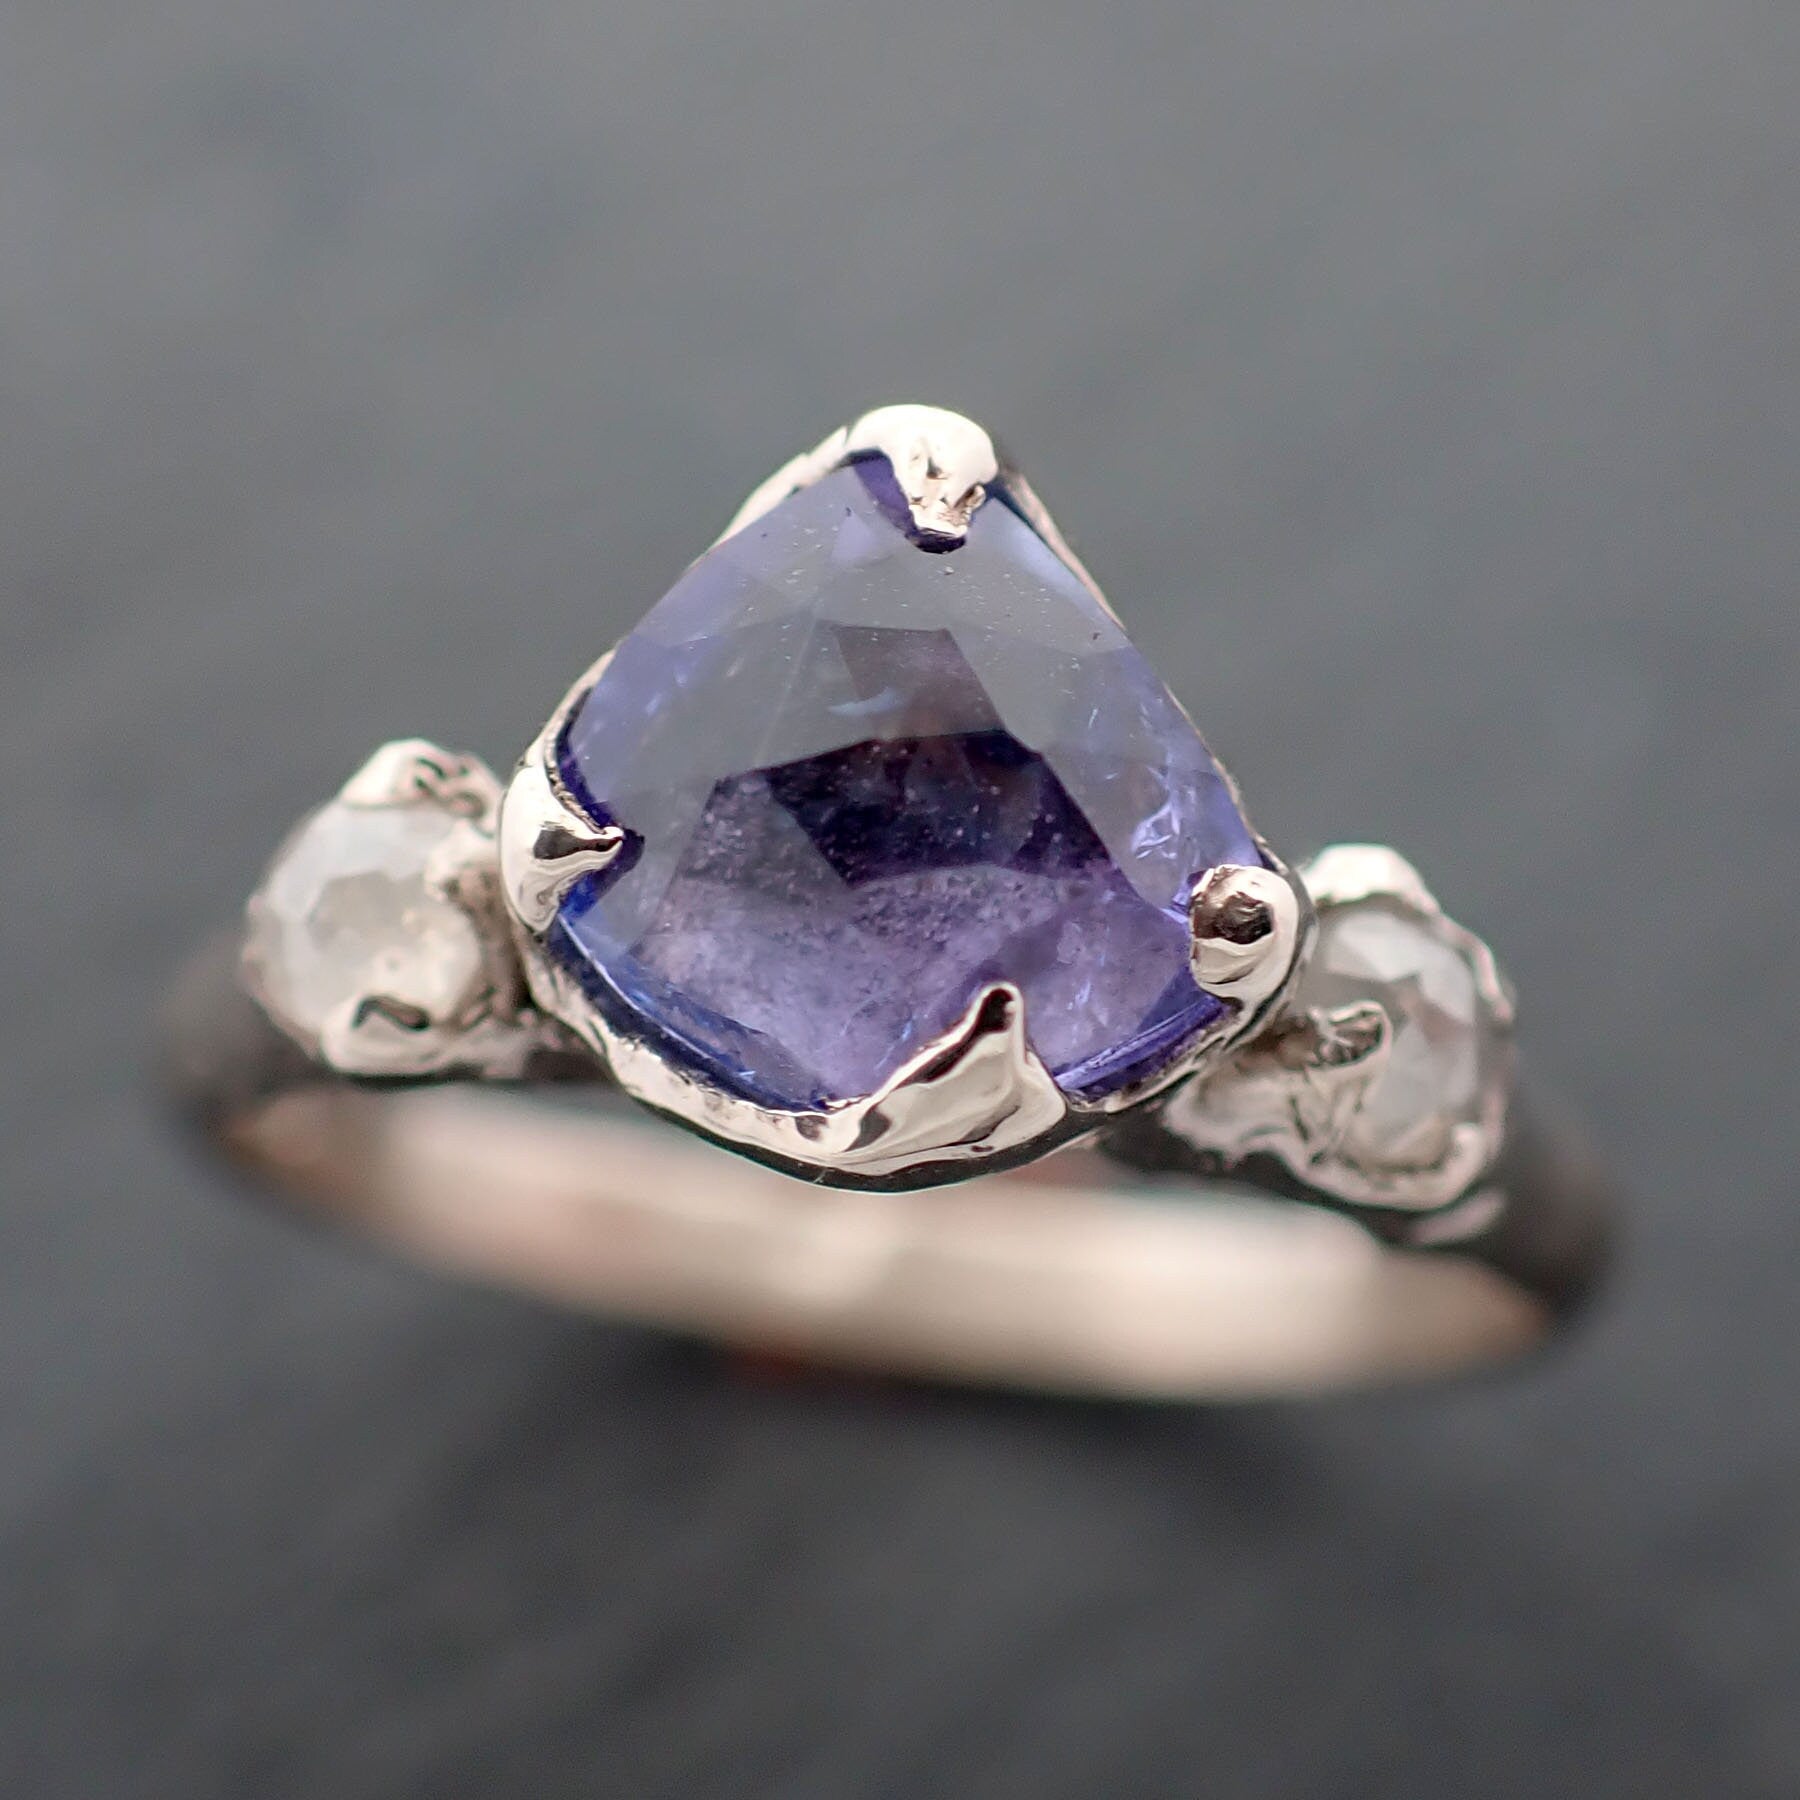 Lavender Sapphire with fancy cut diamonds 14k White Gold Multi stone Ring One Of a Kind Gemstone Ring Recycled gold 3417